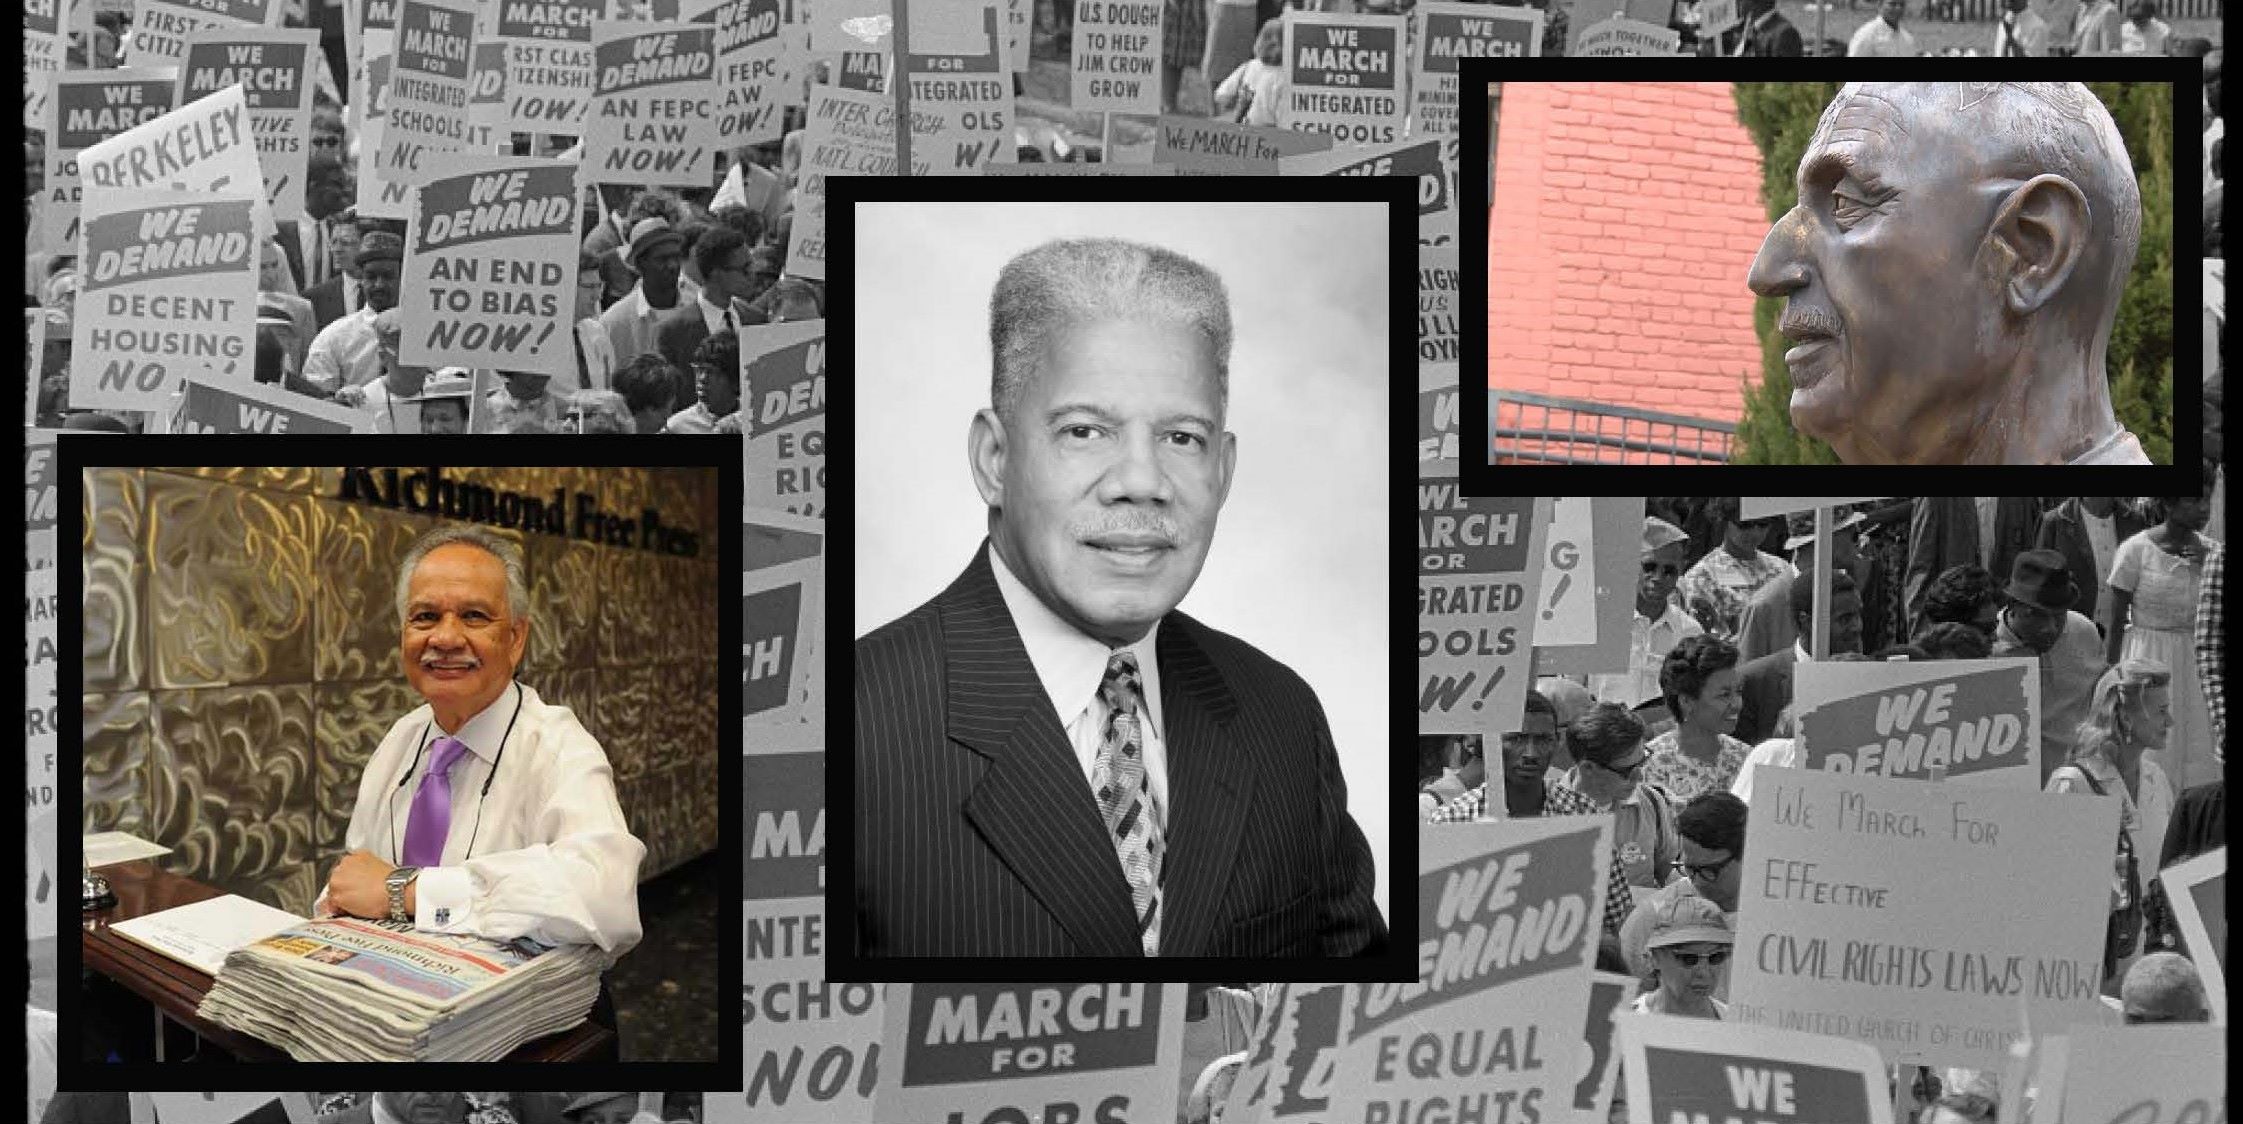 Three different images of men overlayed on civil rights march image.